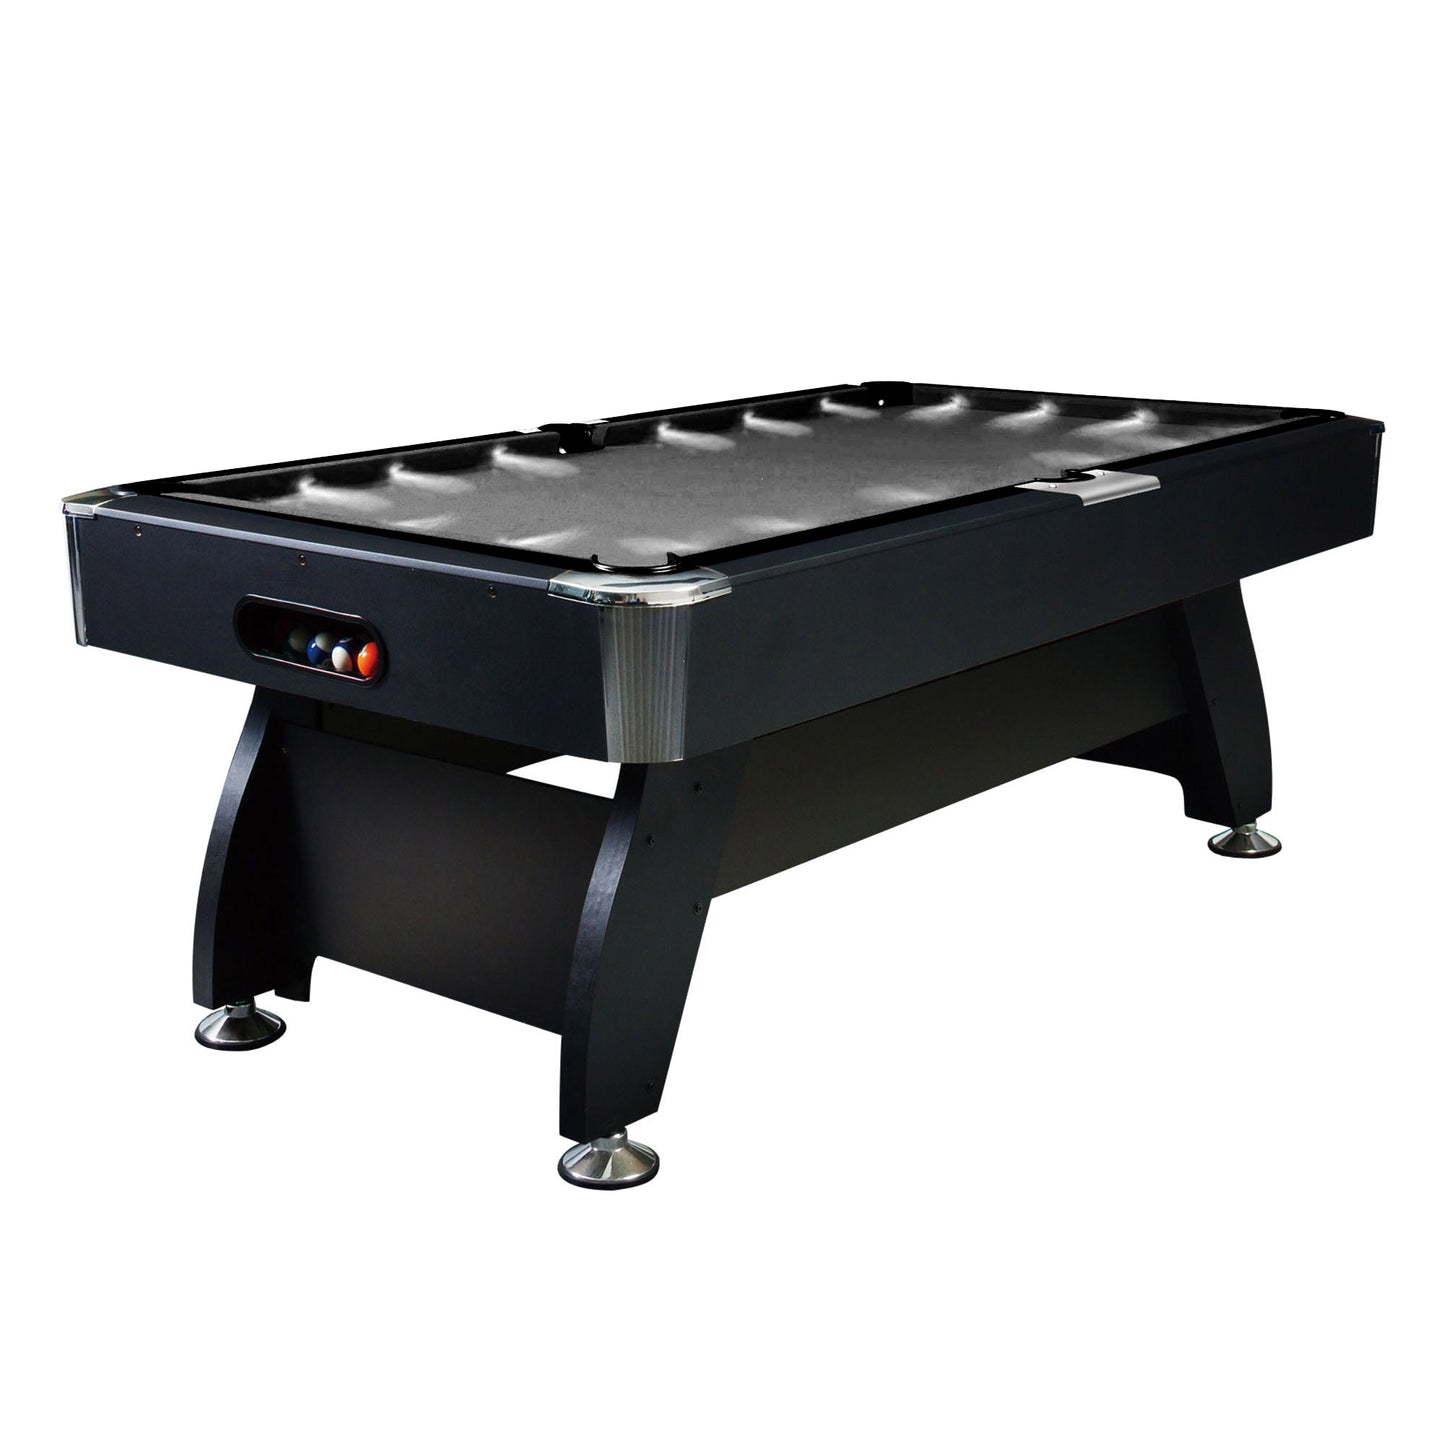 8FT LED Snooker Billiard Pool Table with Free Accessories - Black